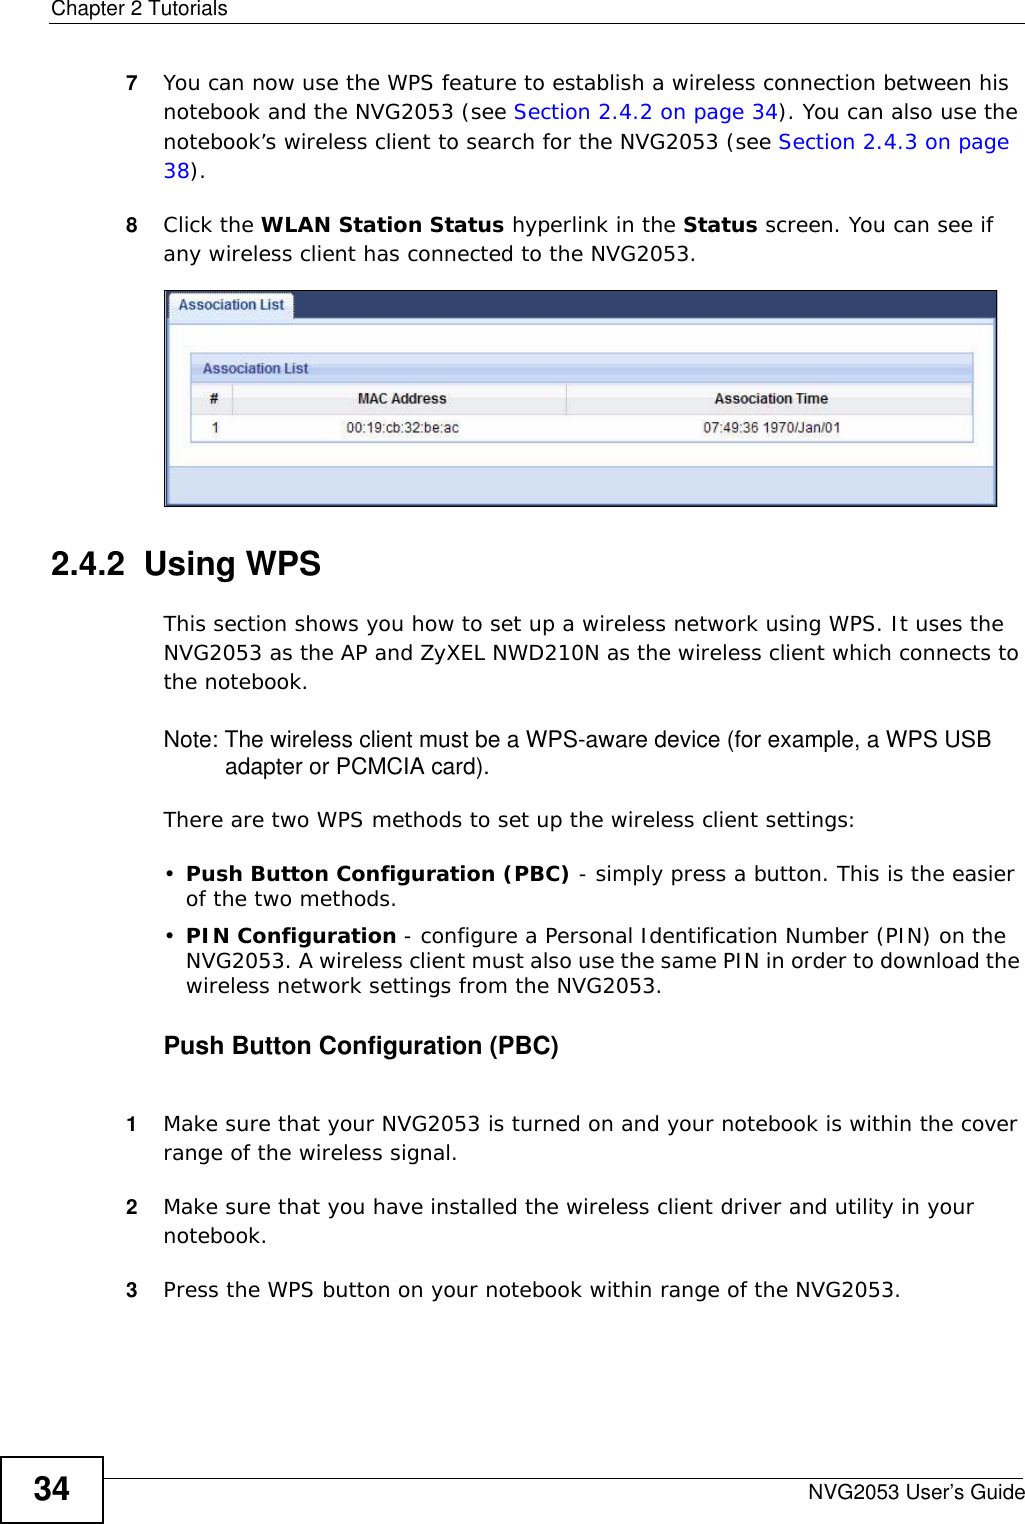 Chapter 2 TutorialsNVG2053 User’s Guide347You can now use the WPS feature to establish a wireless connection between his notebook and the NVG2053 (see Section 2.4.2 on page 34). You can also use the notebook’s wireless client to search for the NVG2053 (see Section 2.4.3 on page 38).8Click the WLAN Station Status hyperlink in the Status screen. You can see if any wireless client has connected to the NVG2053. 2.4.2  Using WPSThis section shows you how to set up a wireless network using WPS. It uses the NVG2053 as the AP and ZyXEL NWD210N as the wireless client which connects to the notebook. Note: The wireless client must be a WPS-aware device (for example, a WPS USB adapter or PCMCIA card).There are two WPS methods to set up the wireless client settings:•Push Button Configuration (PBC) - simply press a button. This is the easier of the two methods.•PIN Configuration - configure a Personal Identification Number (PIN) on the NVG2053. A wireless client must also use the same PIN in order to download the wireless network settings from the NVG2053.Push Button Configuration (PBC)1Make sure that your NVG2053 is turned on and your notebook is within the cover range of the wireless signal. 2Make sure that you have installed the wireless client driver and utility in your notebook.3Press the WPS button on your notebook within range of the NVG2053.